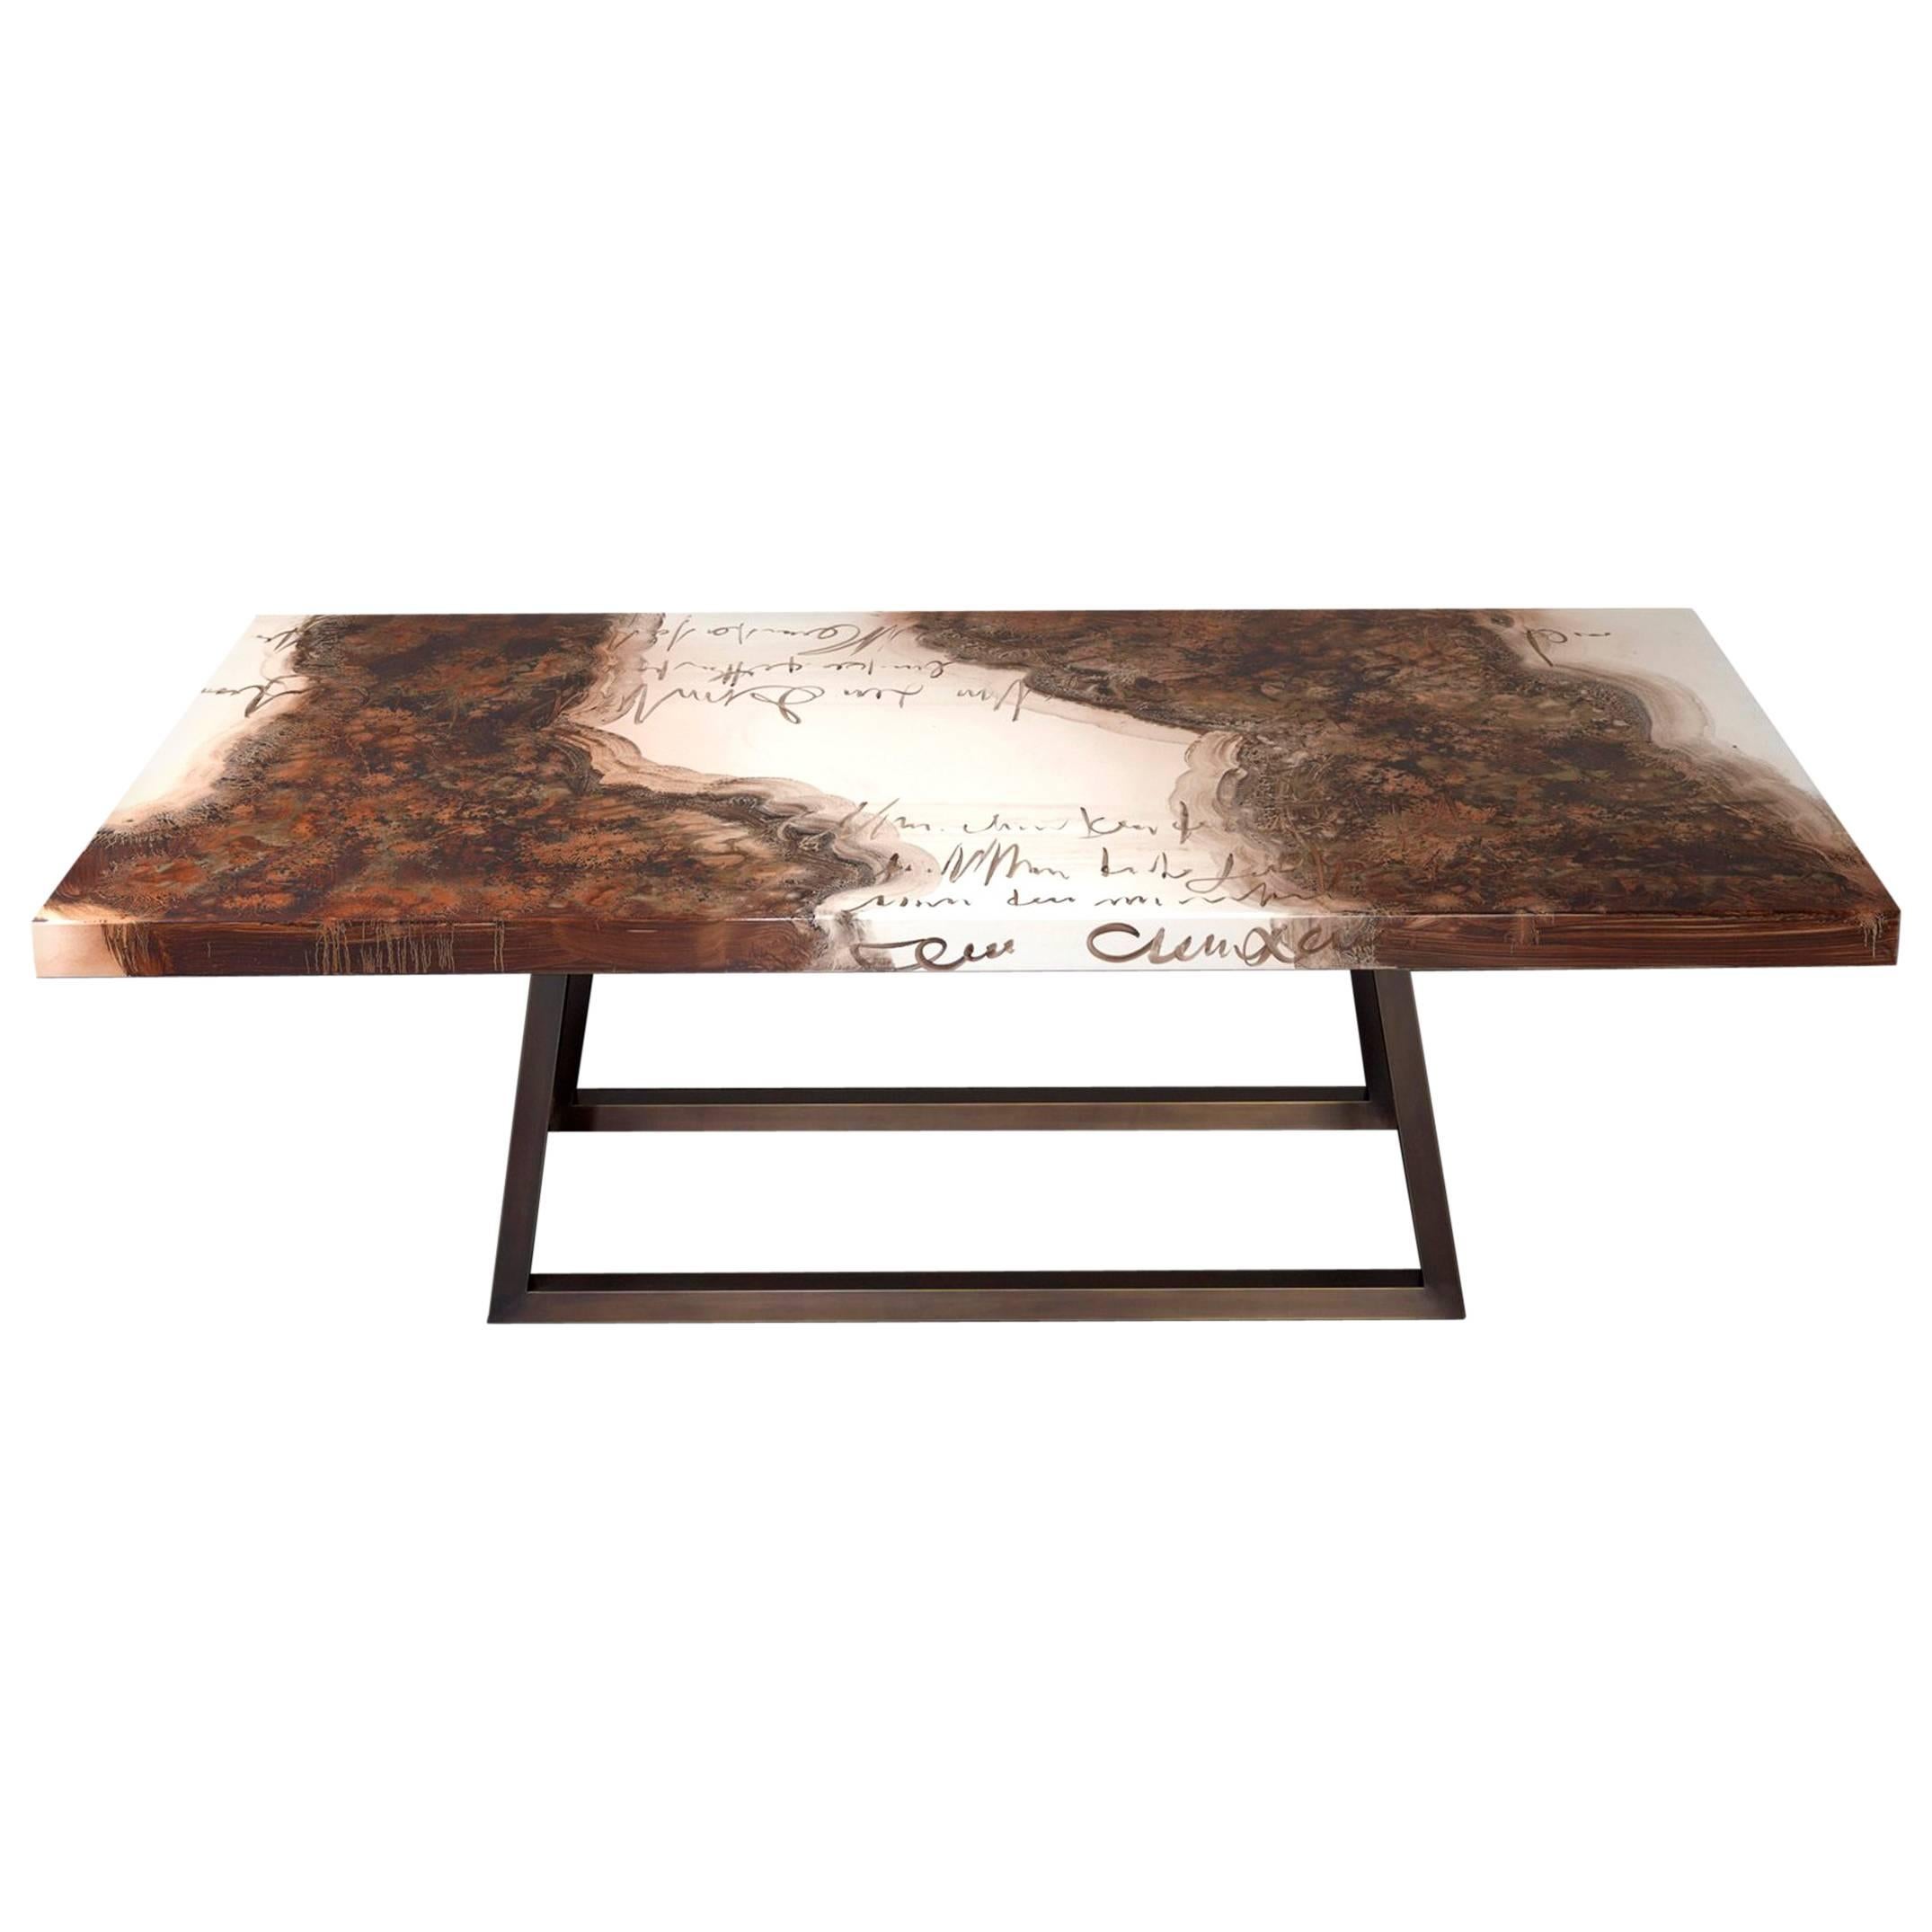 Creatis Table Hand-Painted Lacquered Solid Wood